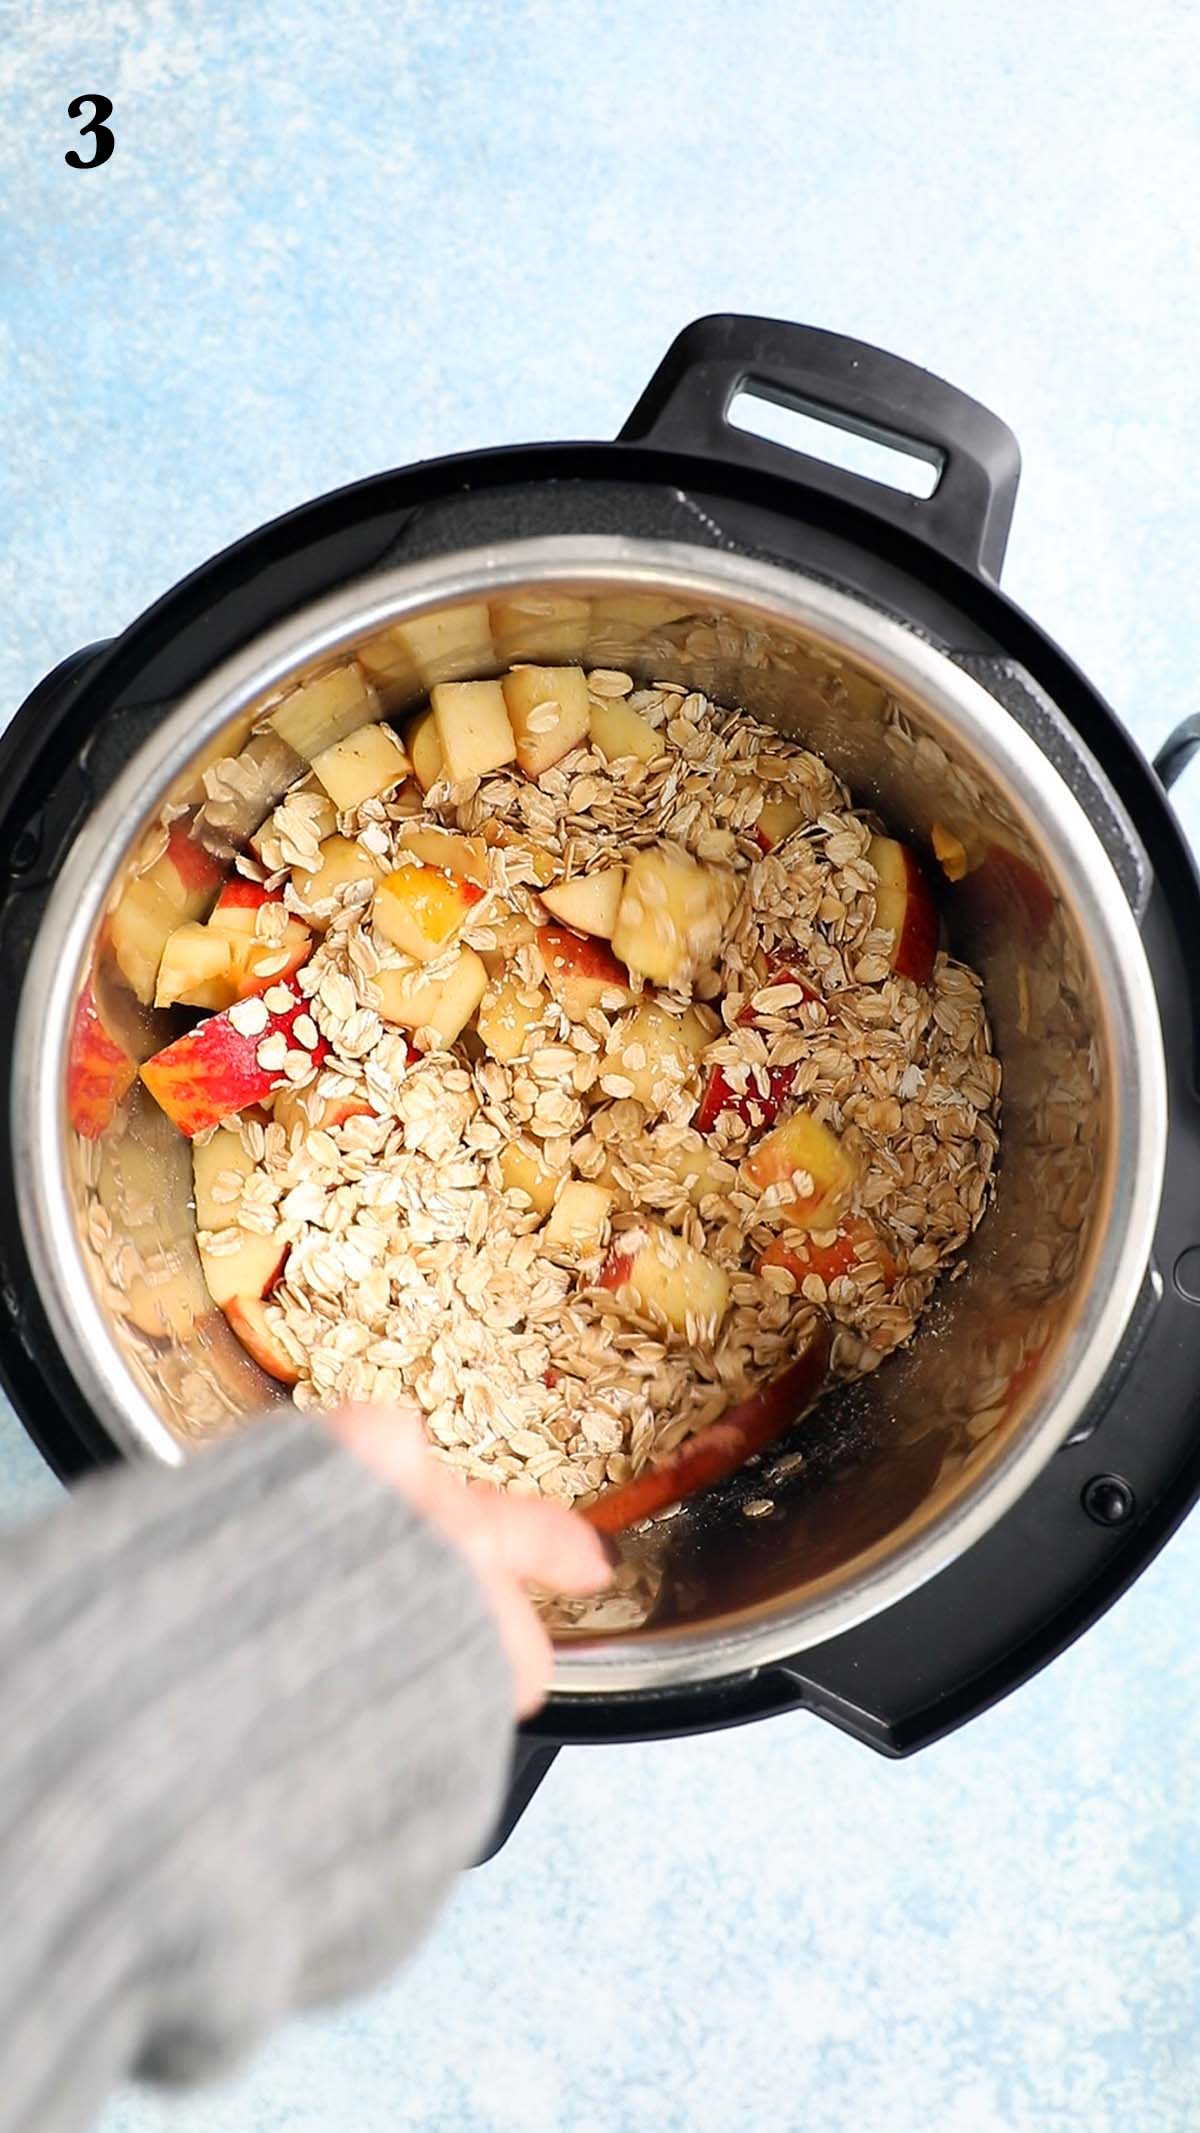 stirring chopped apples and oats in an instant pot with a wooden spoon.